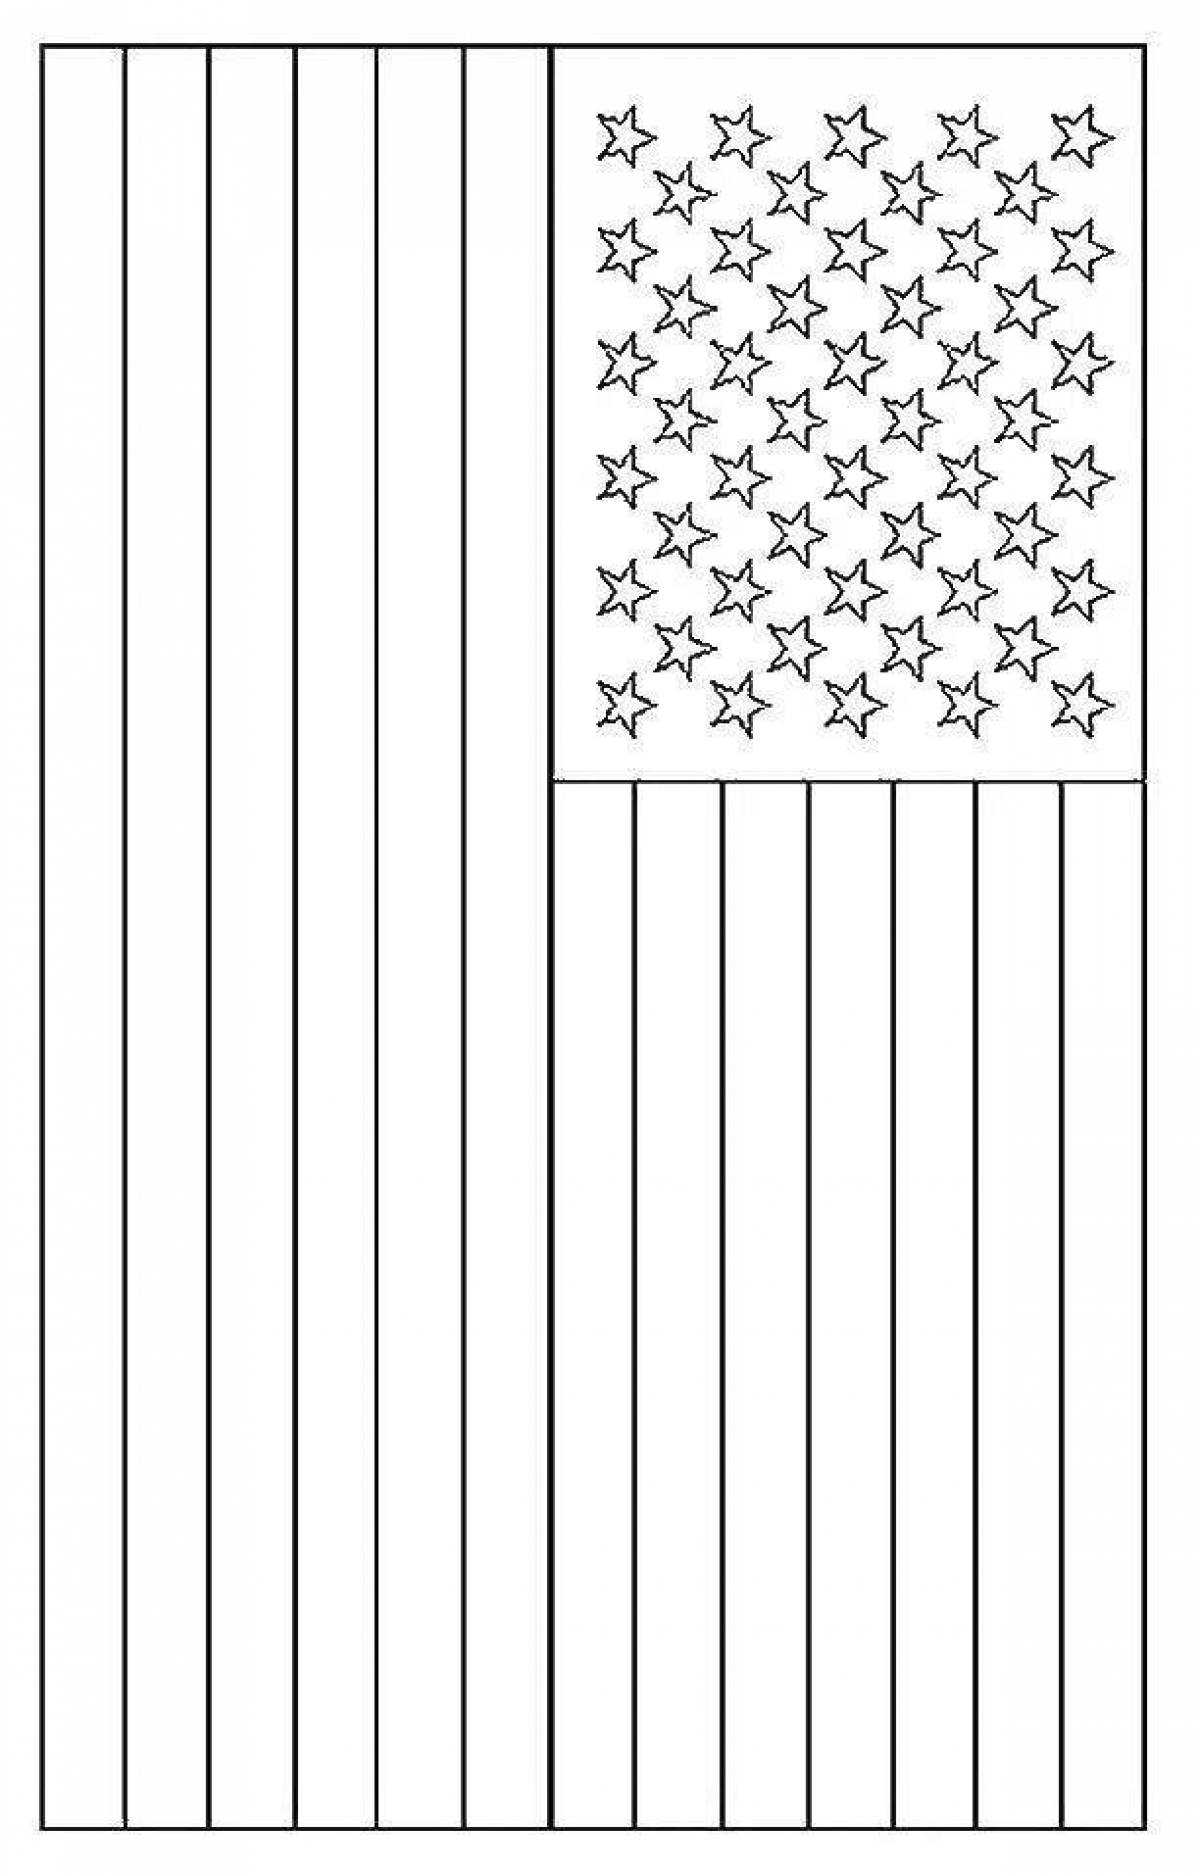 Coloring page shining american flag